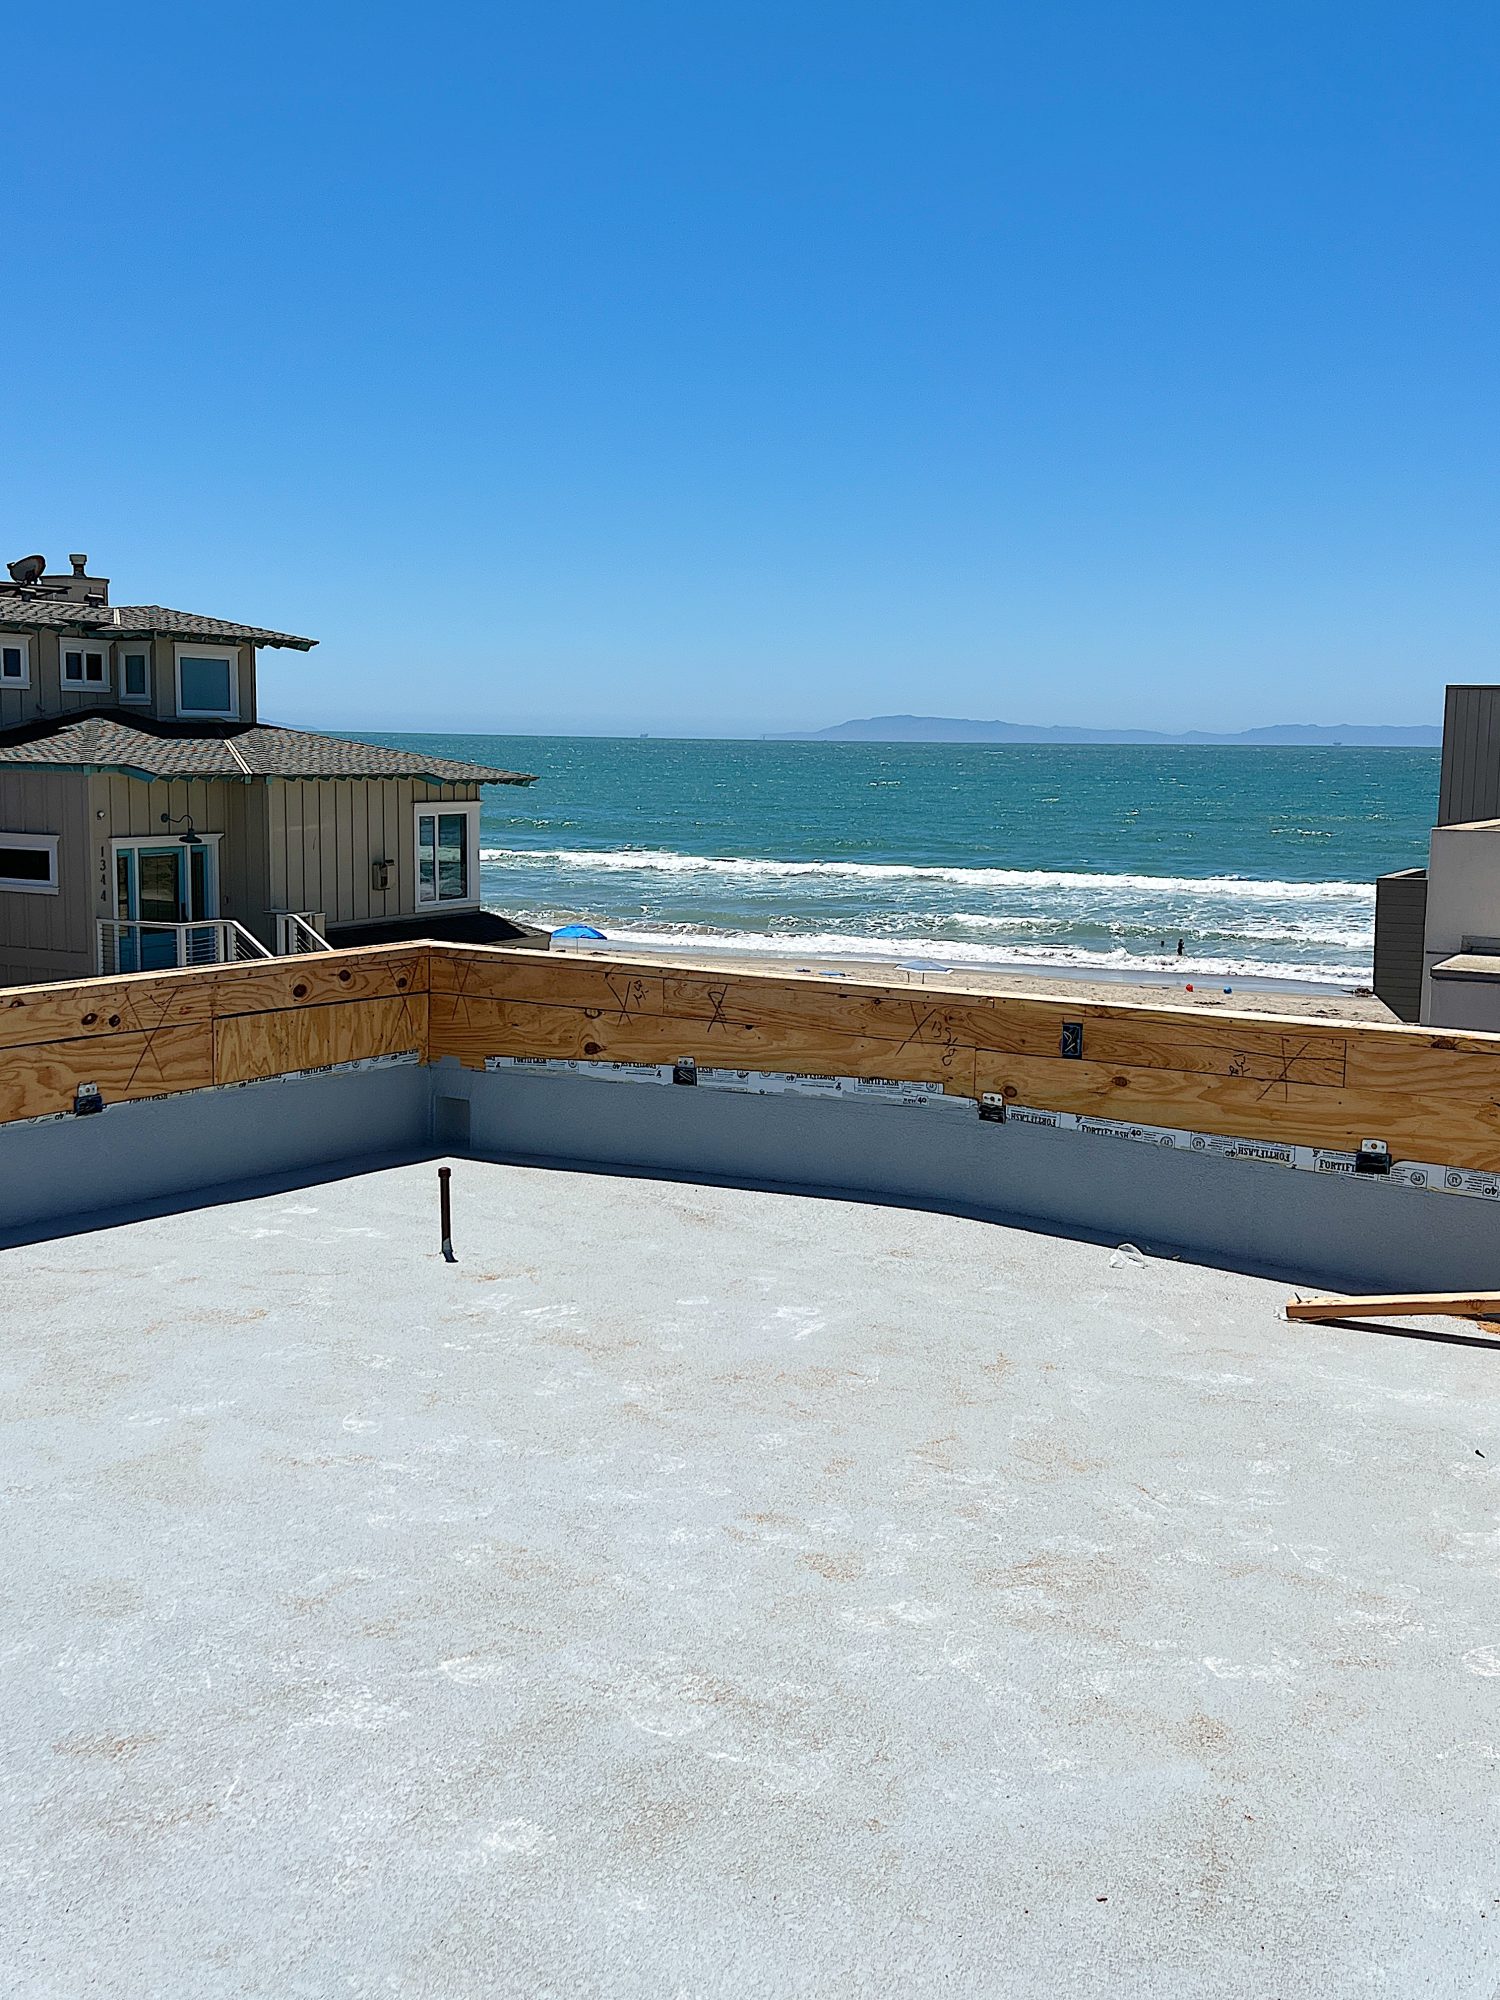 New Deck at the Beach House